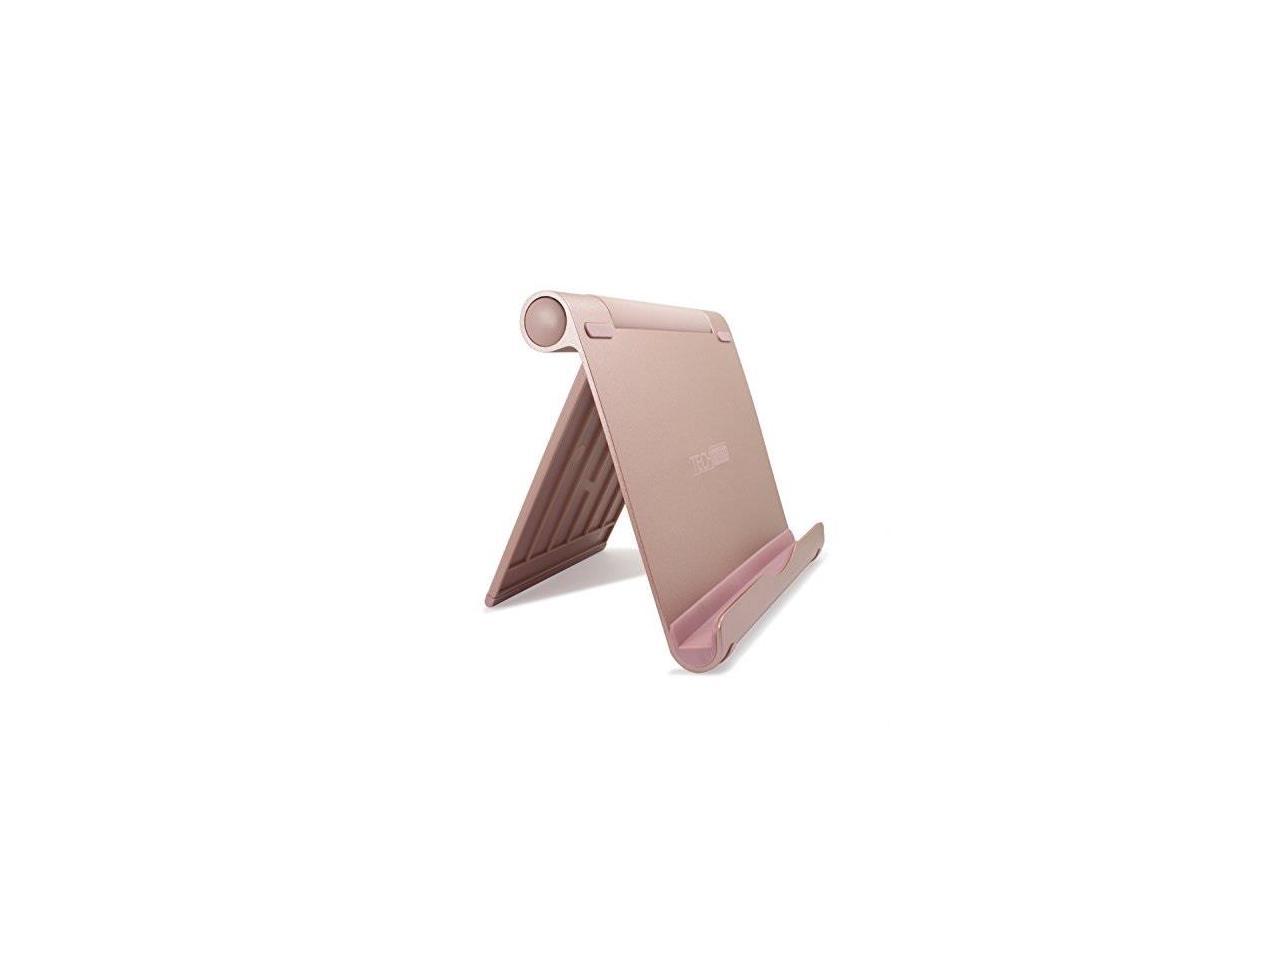 E-Readers and Smartphones iPad Pro Stand XL-Size Stand TechMatte Multi-Angle Aluminum Holder for iPad Pro 12.9 10.5 9.7 inch Tablets Rose Gold 